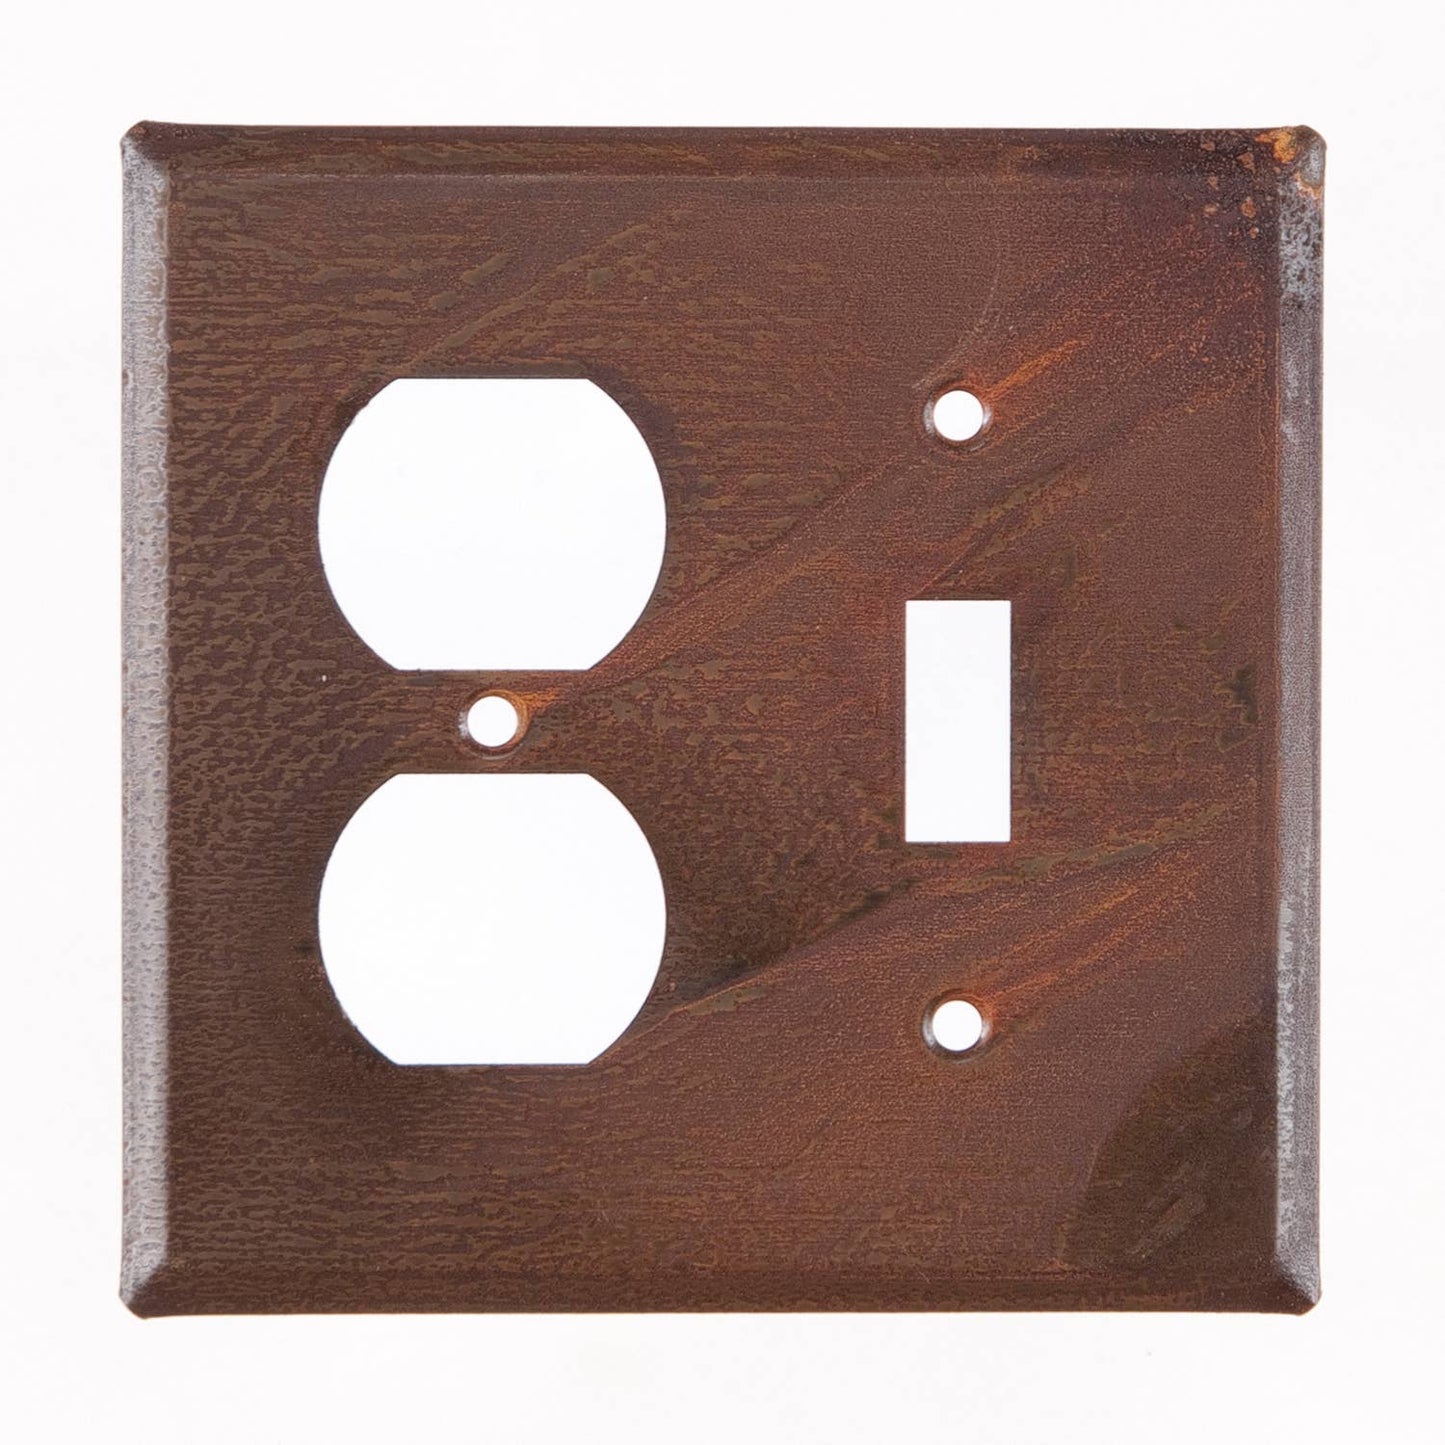 Outlet & Switch Cover in Rustic Tin / Rust Color